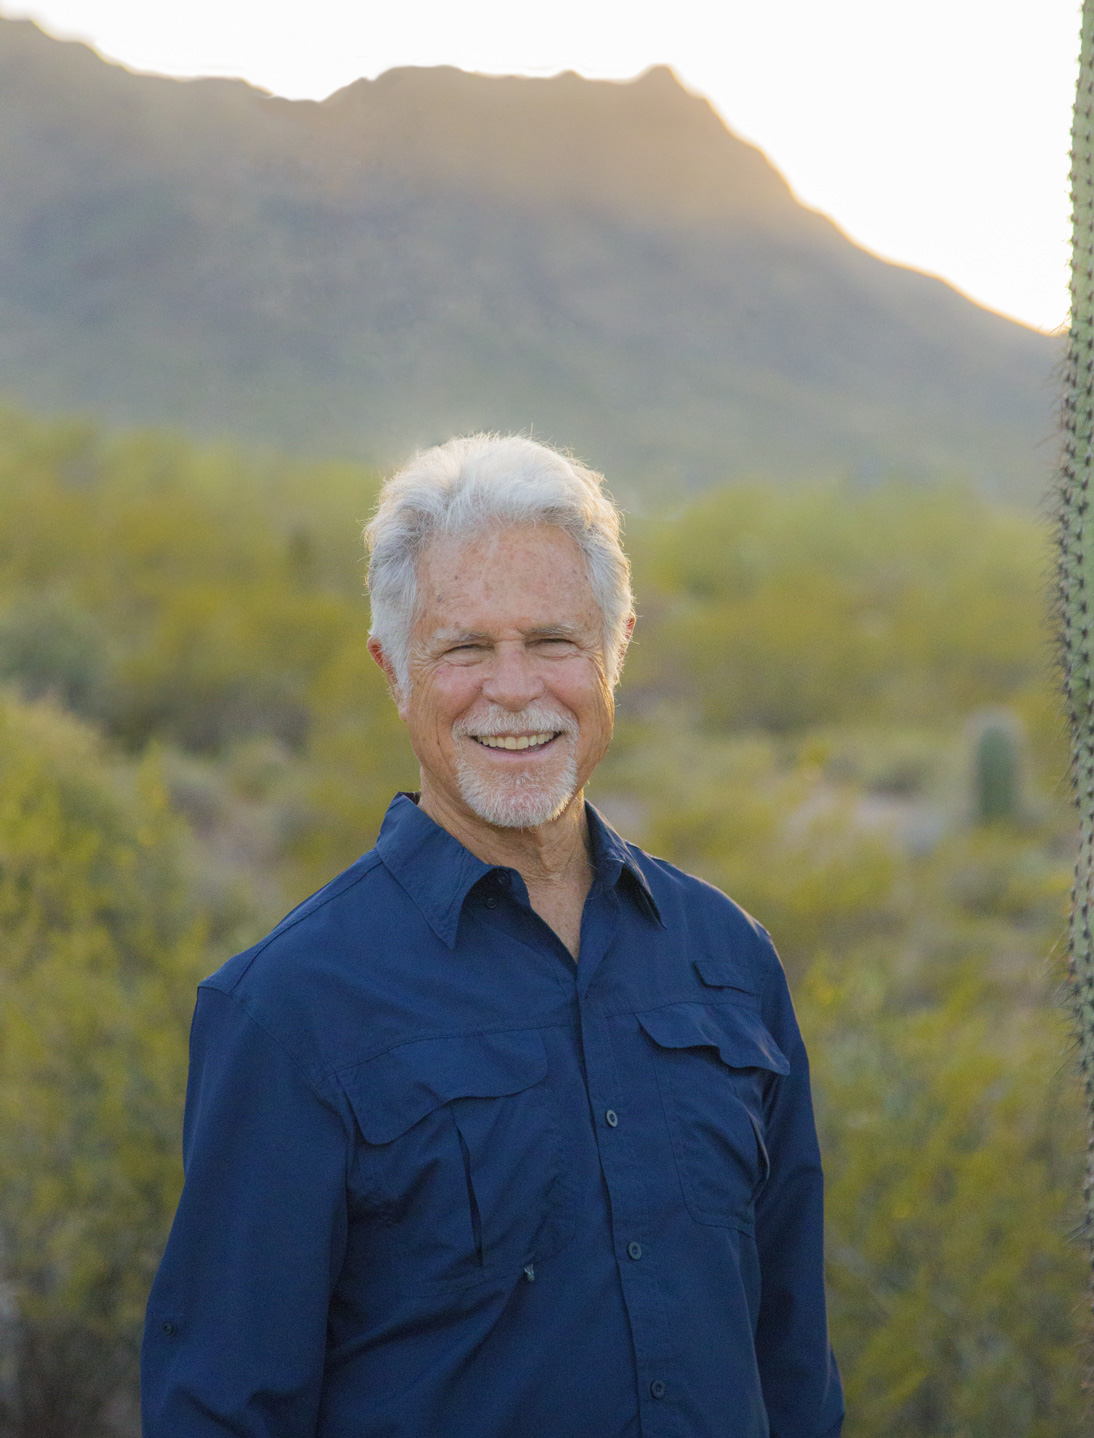 A man with white hair and blue shirt standing in front of trees.